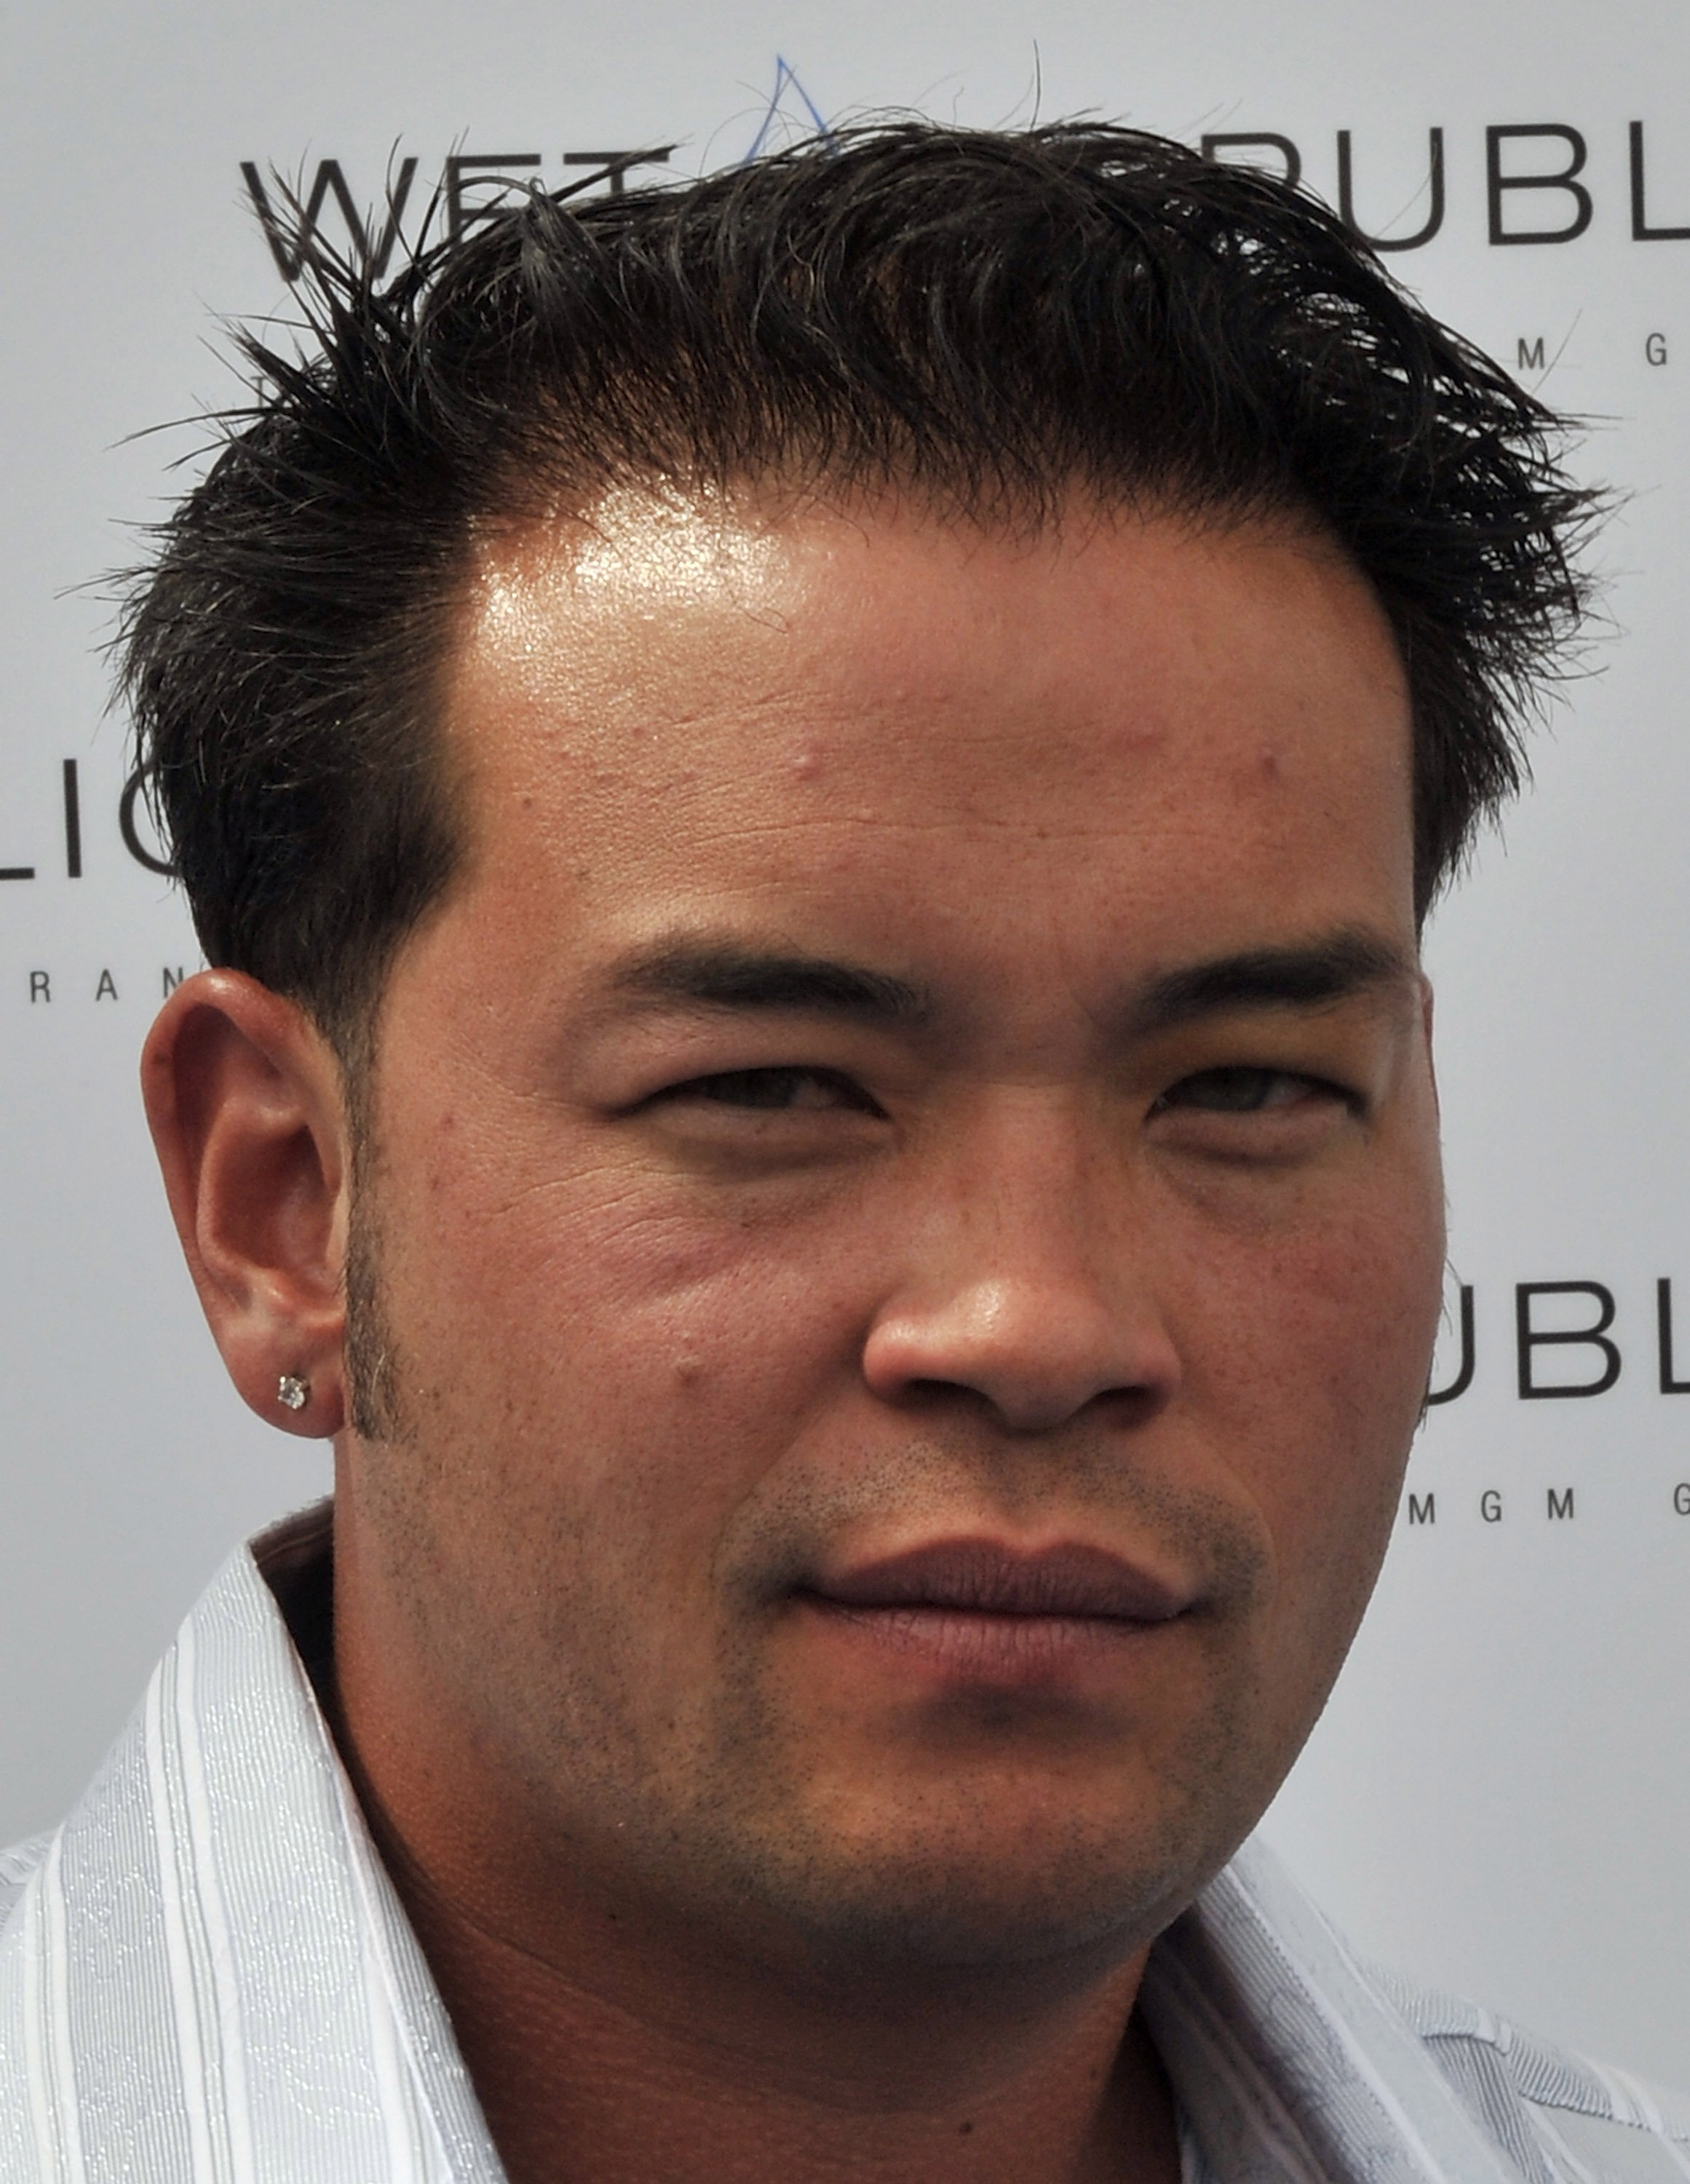 Television personality Jon Gosselin at a Wet Republic event at the MGM Grand Hotel/Casino on August 29, 2009 in Las Vegas, Nevada | Source: Getty Images